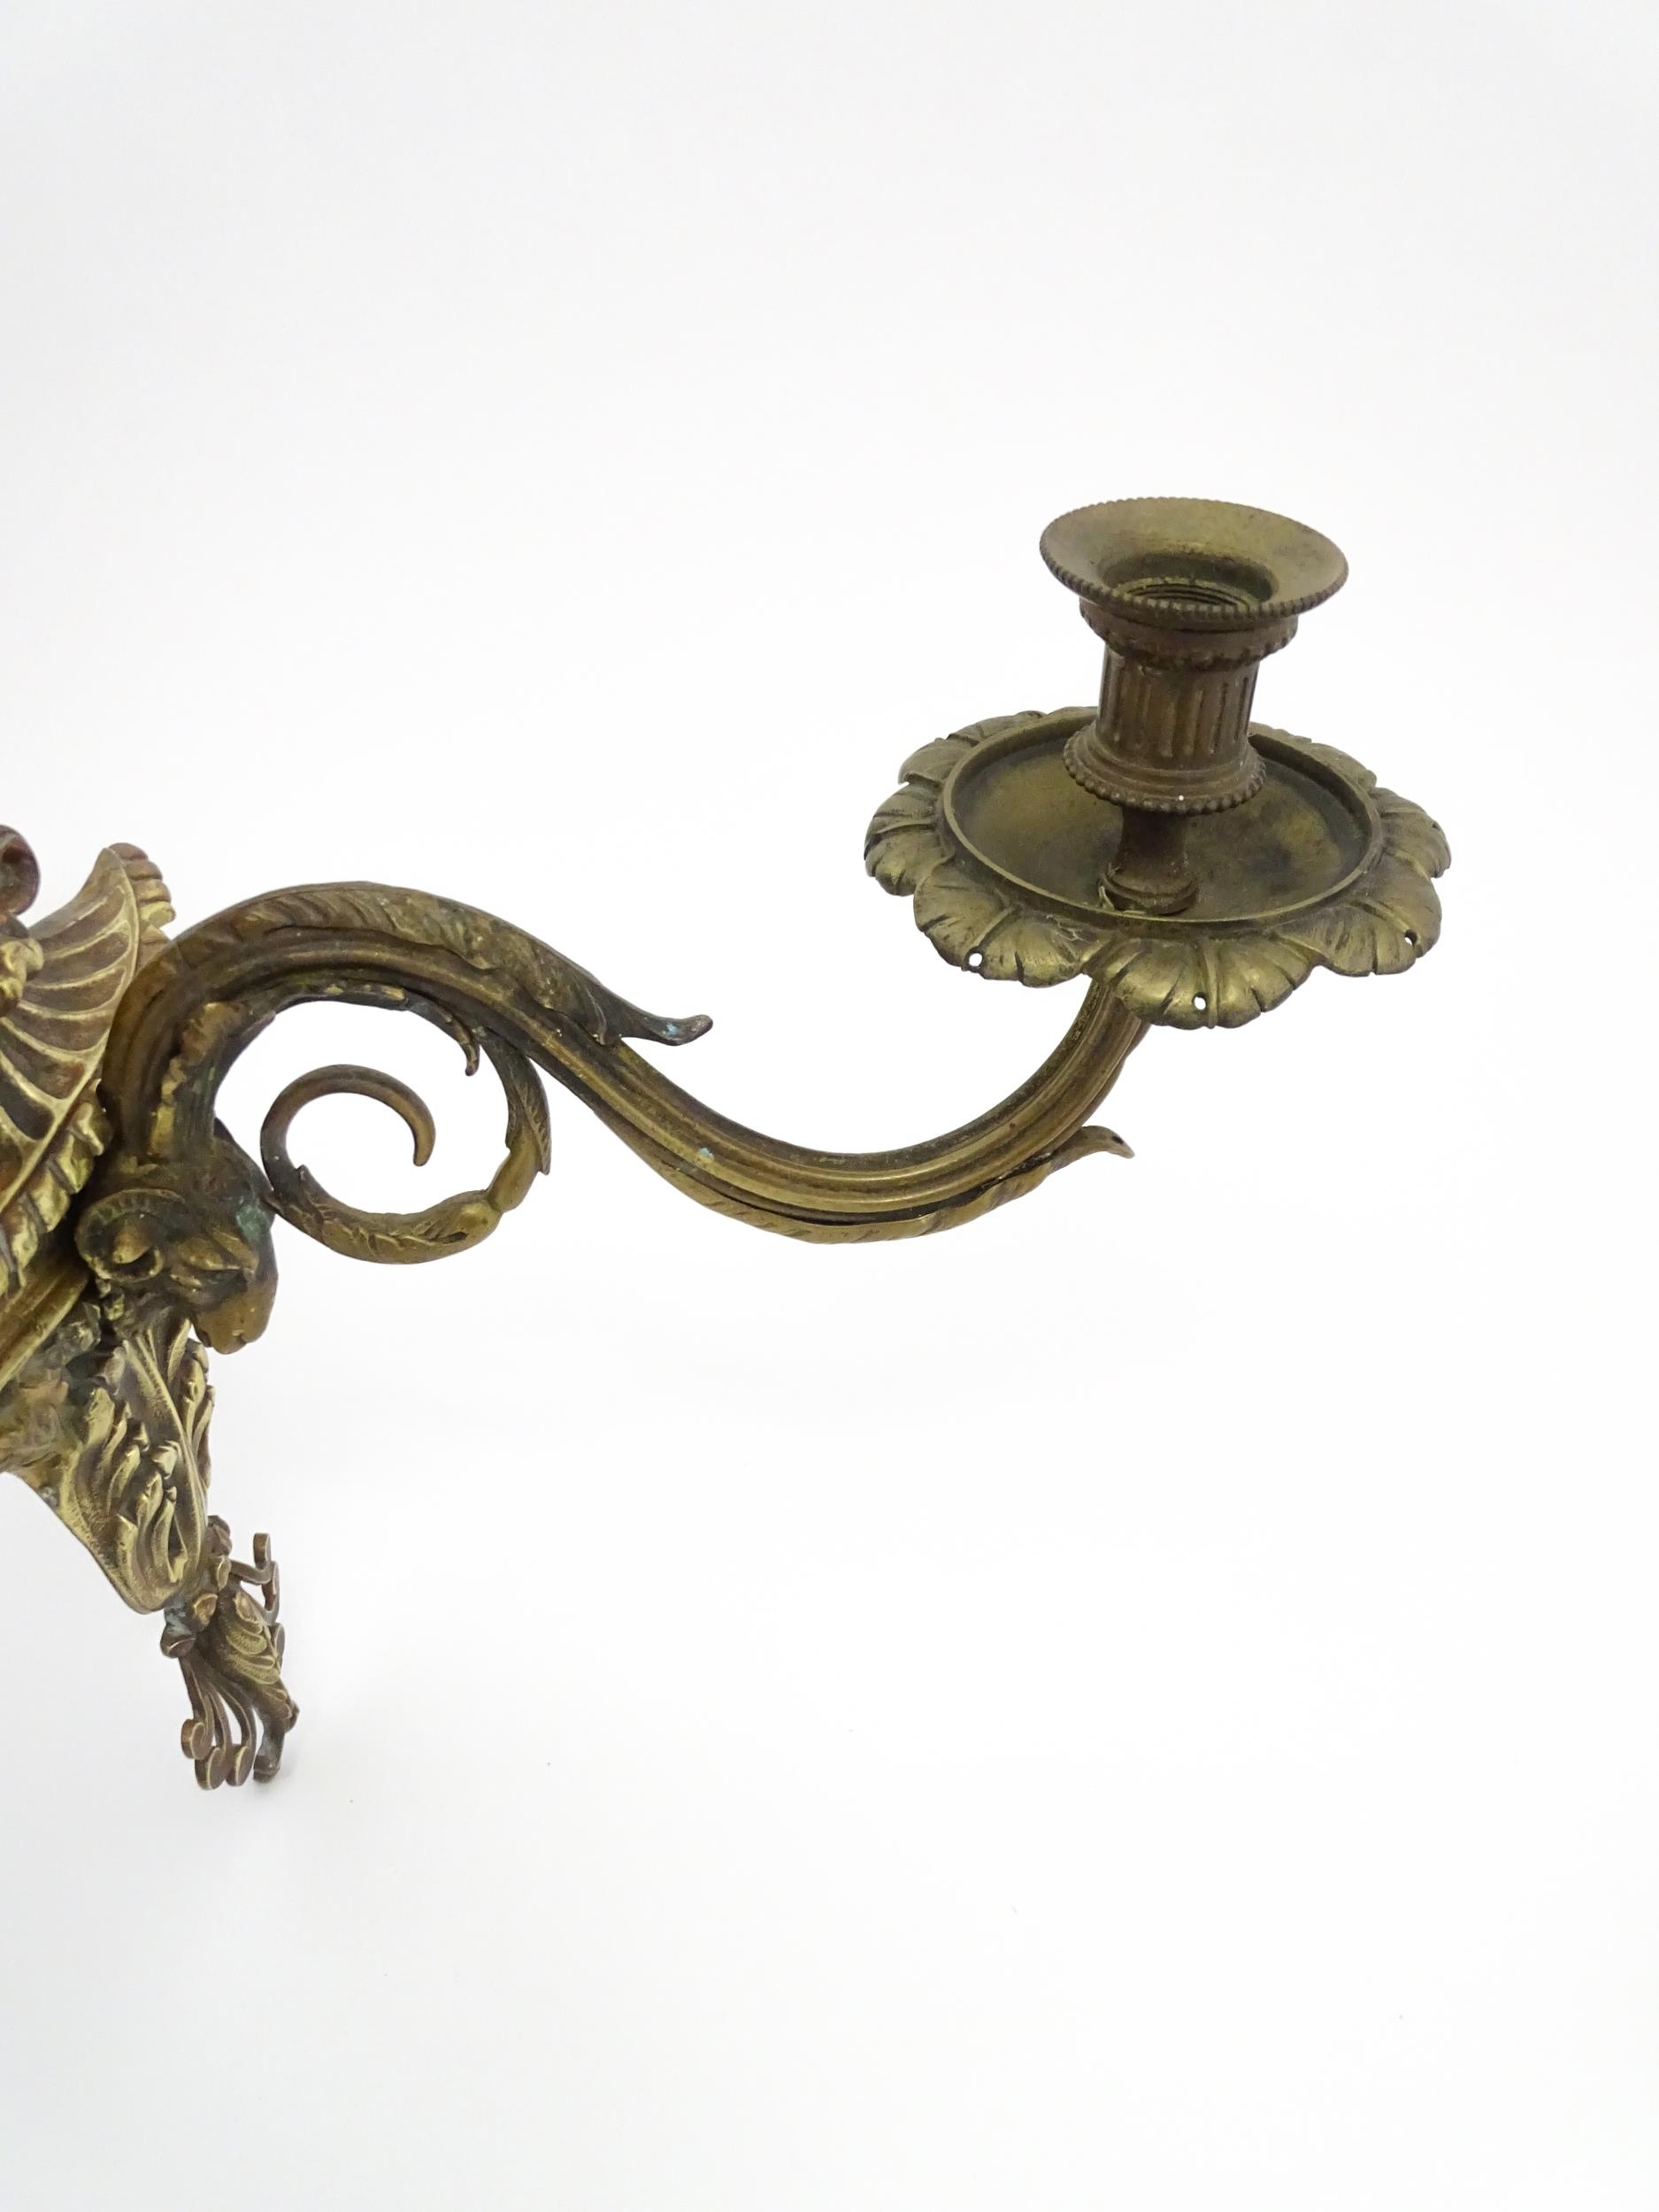 Two cast wall sconces with urn and rams head detail. Approx. 12" high (2) Please Note - we do not - Image 4 of 9